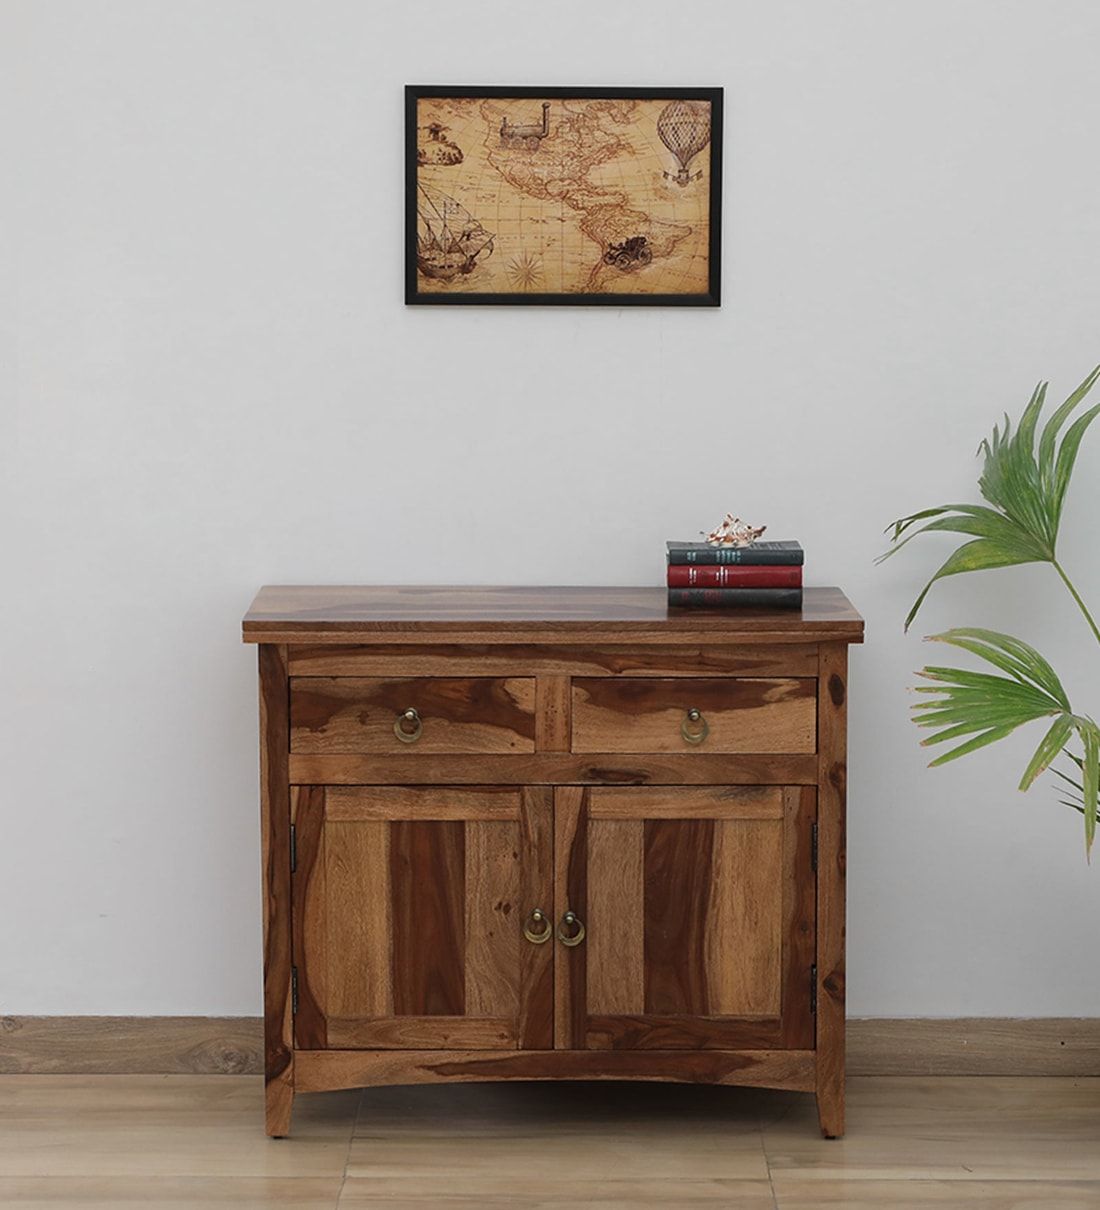 Buy Biscay Sheesham Wood Sideboard In Scratch Resistant Rustic Teak Finish Woodsworth From Pepperfry | Pepperfry Regarding Most Up To Date Rustic Walnut Sideboards (View 14 of 15)